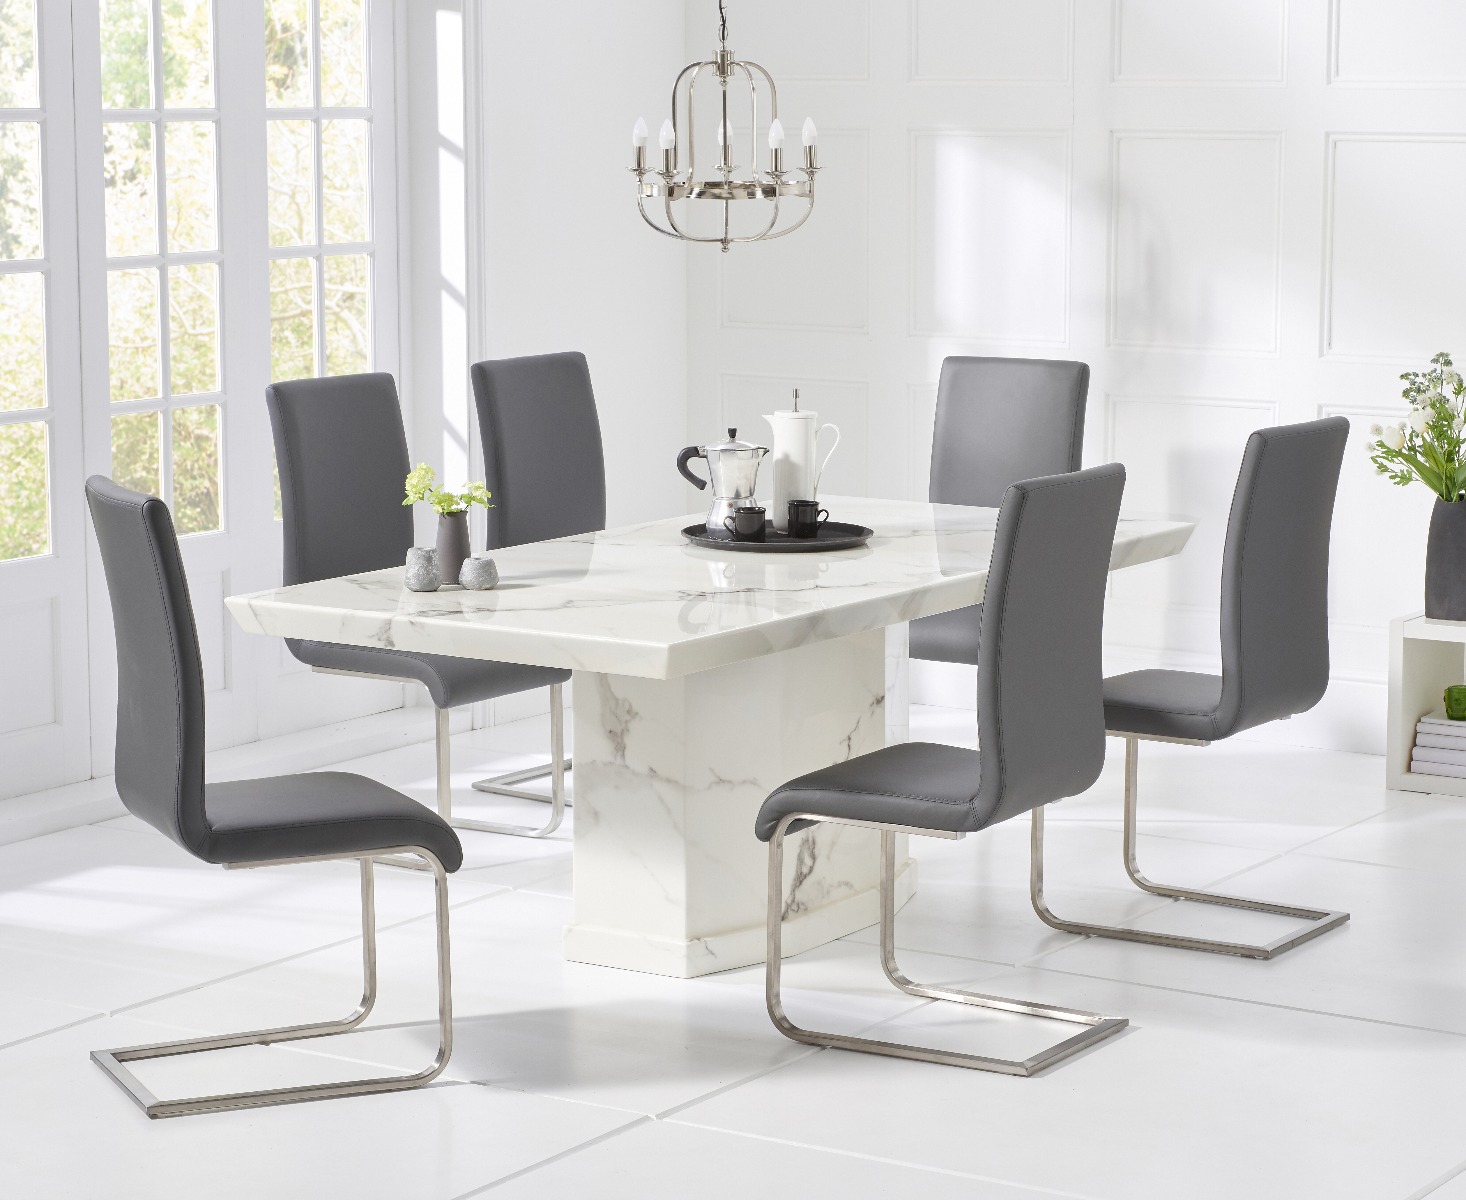 Carvelle 200cm White Pedestal Marble Dining Table With 8 Black Malaga Chairs